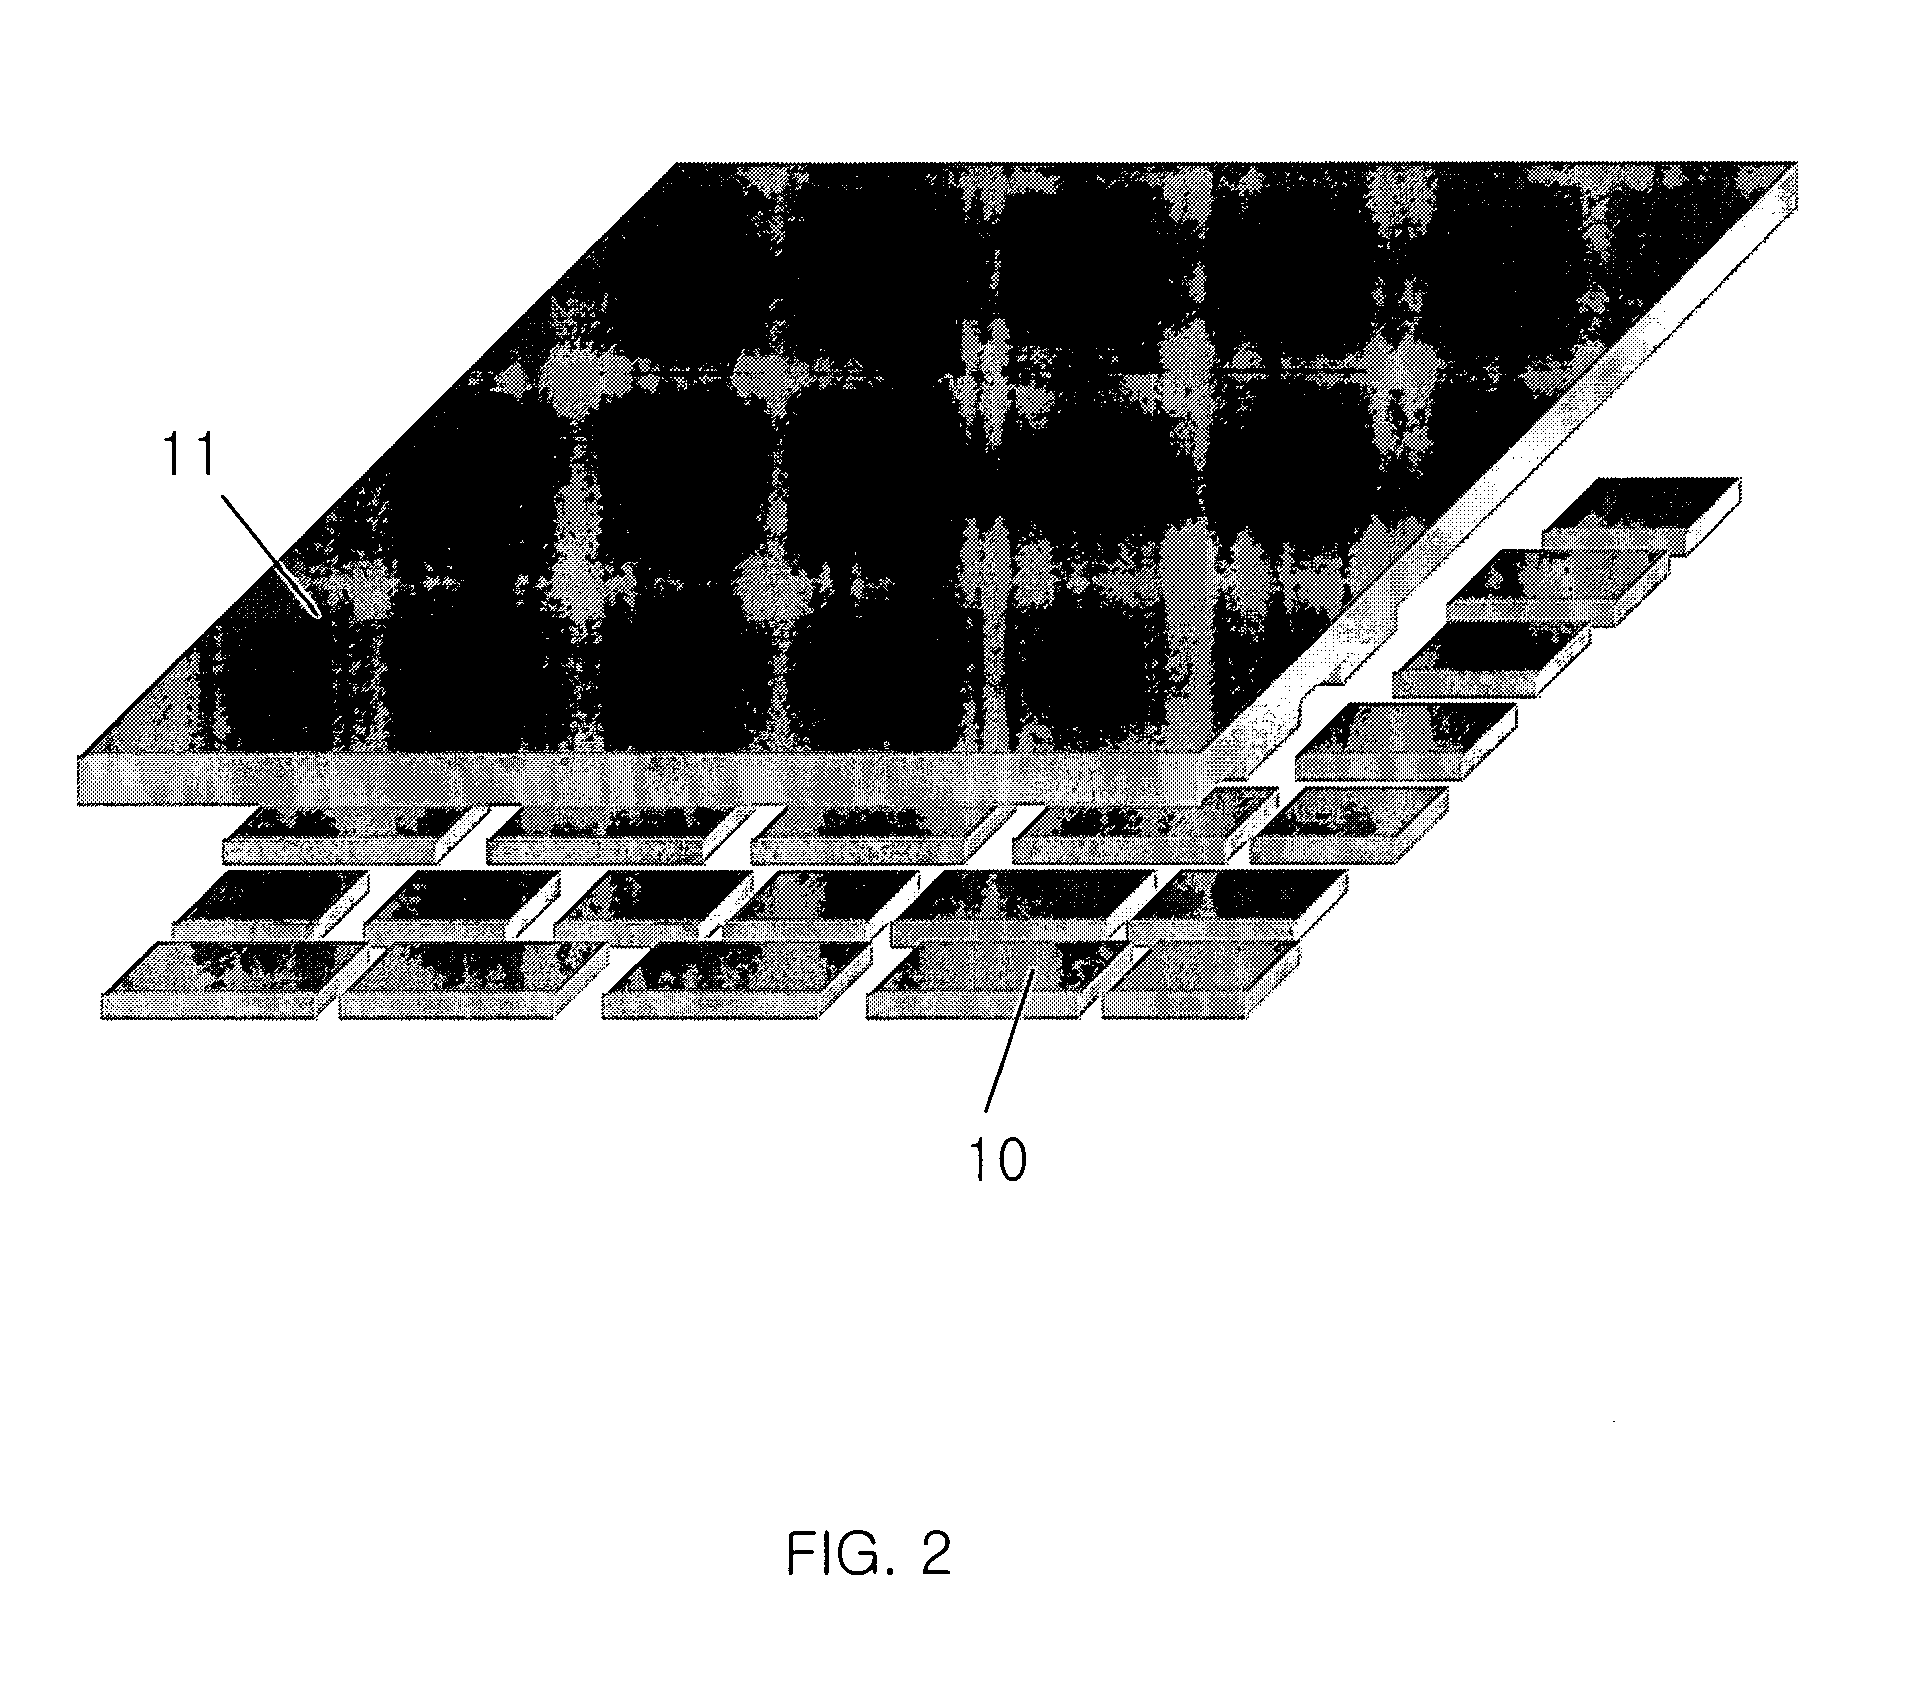 Variable focal length lens and lens array comprising discretely controlled micromirrors